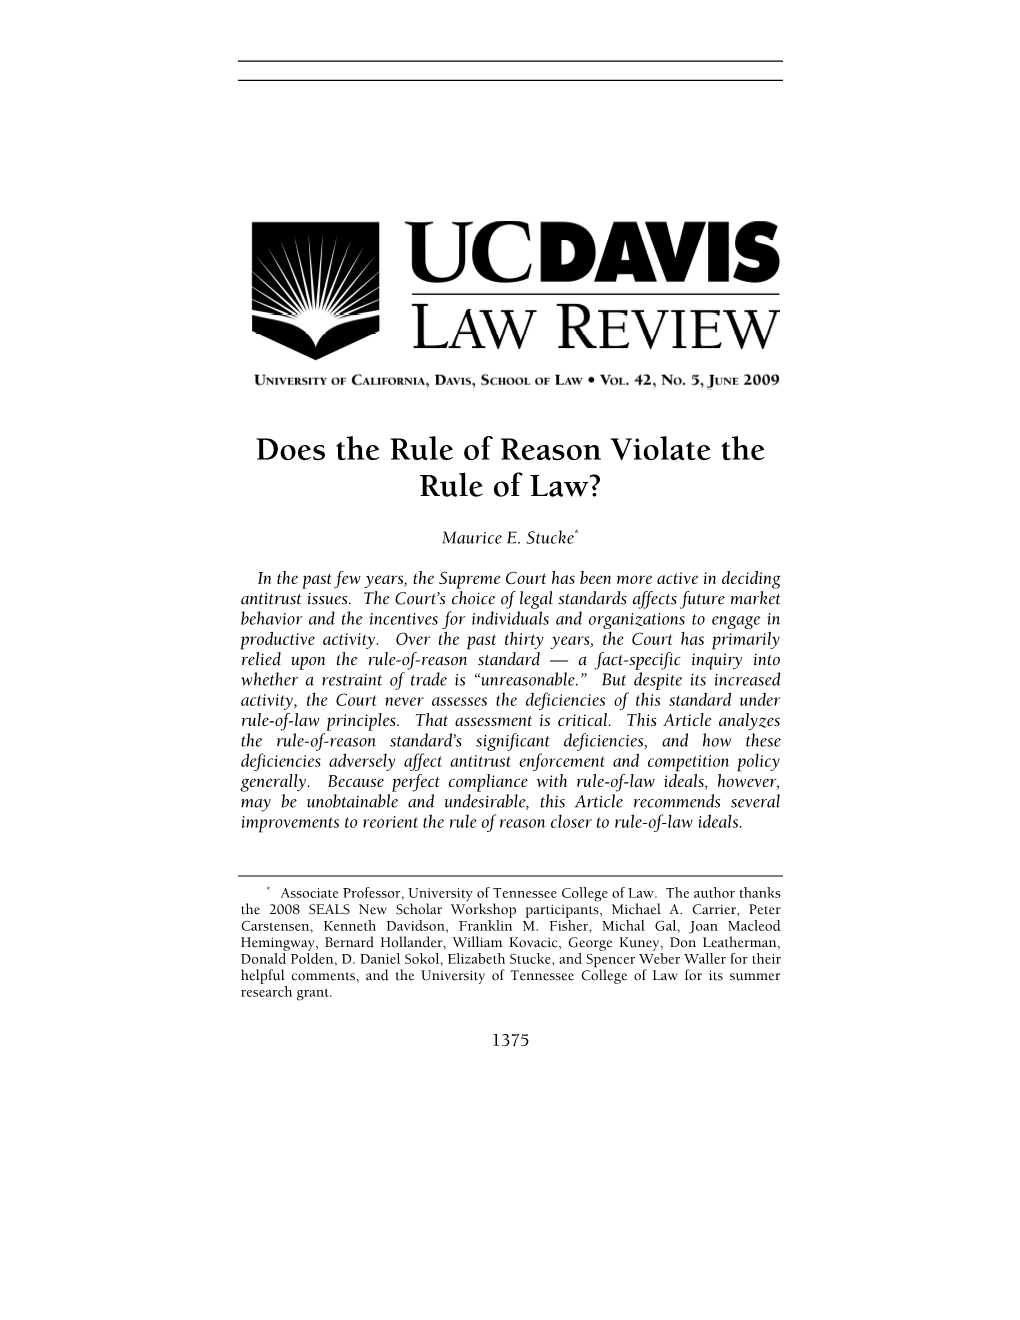 Does the Rule of Reason Violate the Rule of Law?